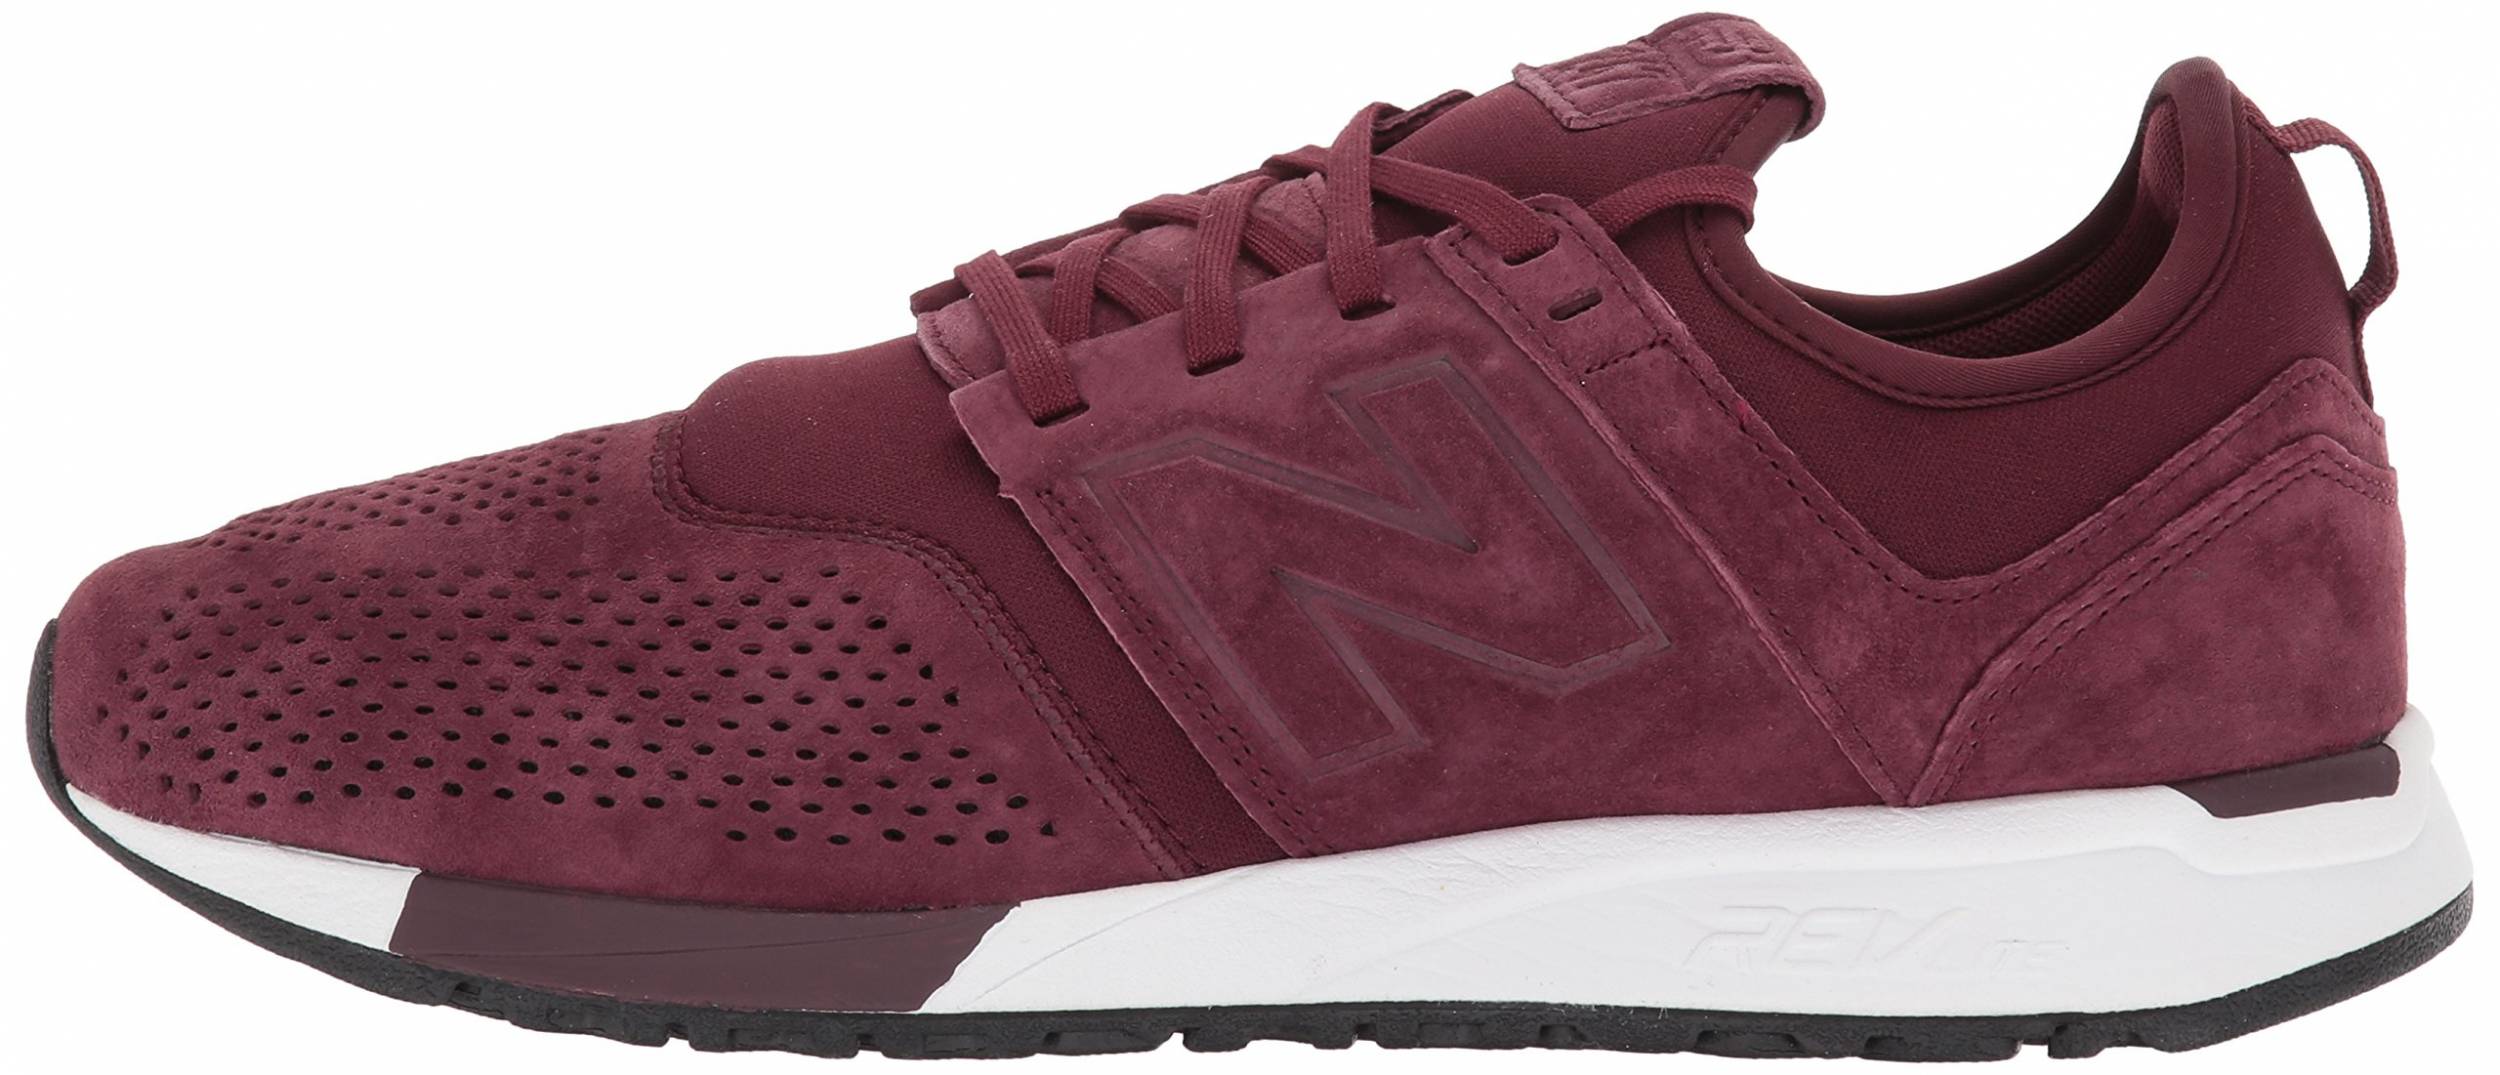 New Balance Suede 247 sneakers (only $75) | RunRepeat